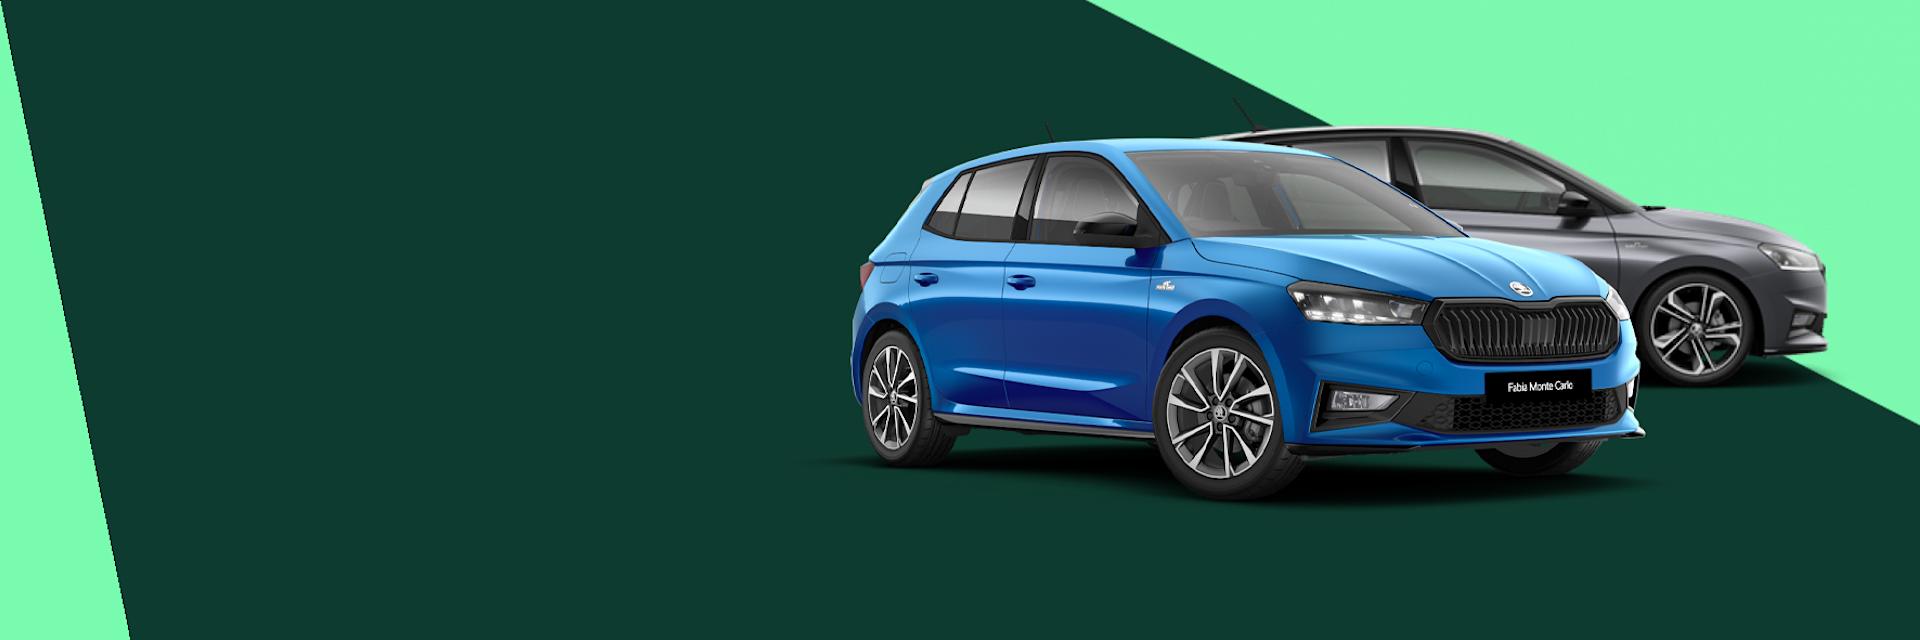 SAVE £1000 on New Fabia